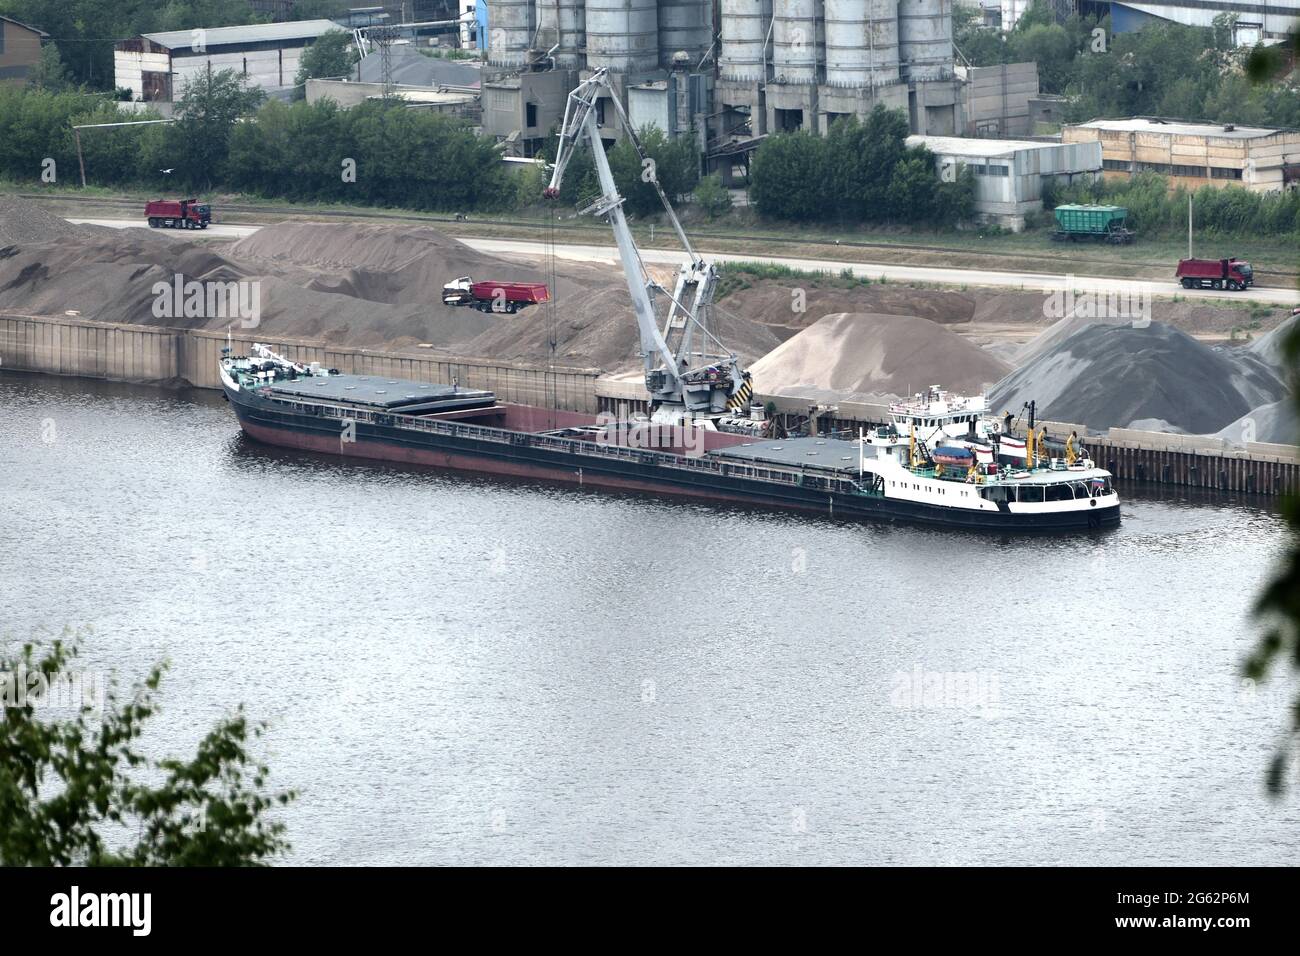 Barge on the river Unloading river sand from a barge Navigable river, river port Stock Photo